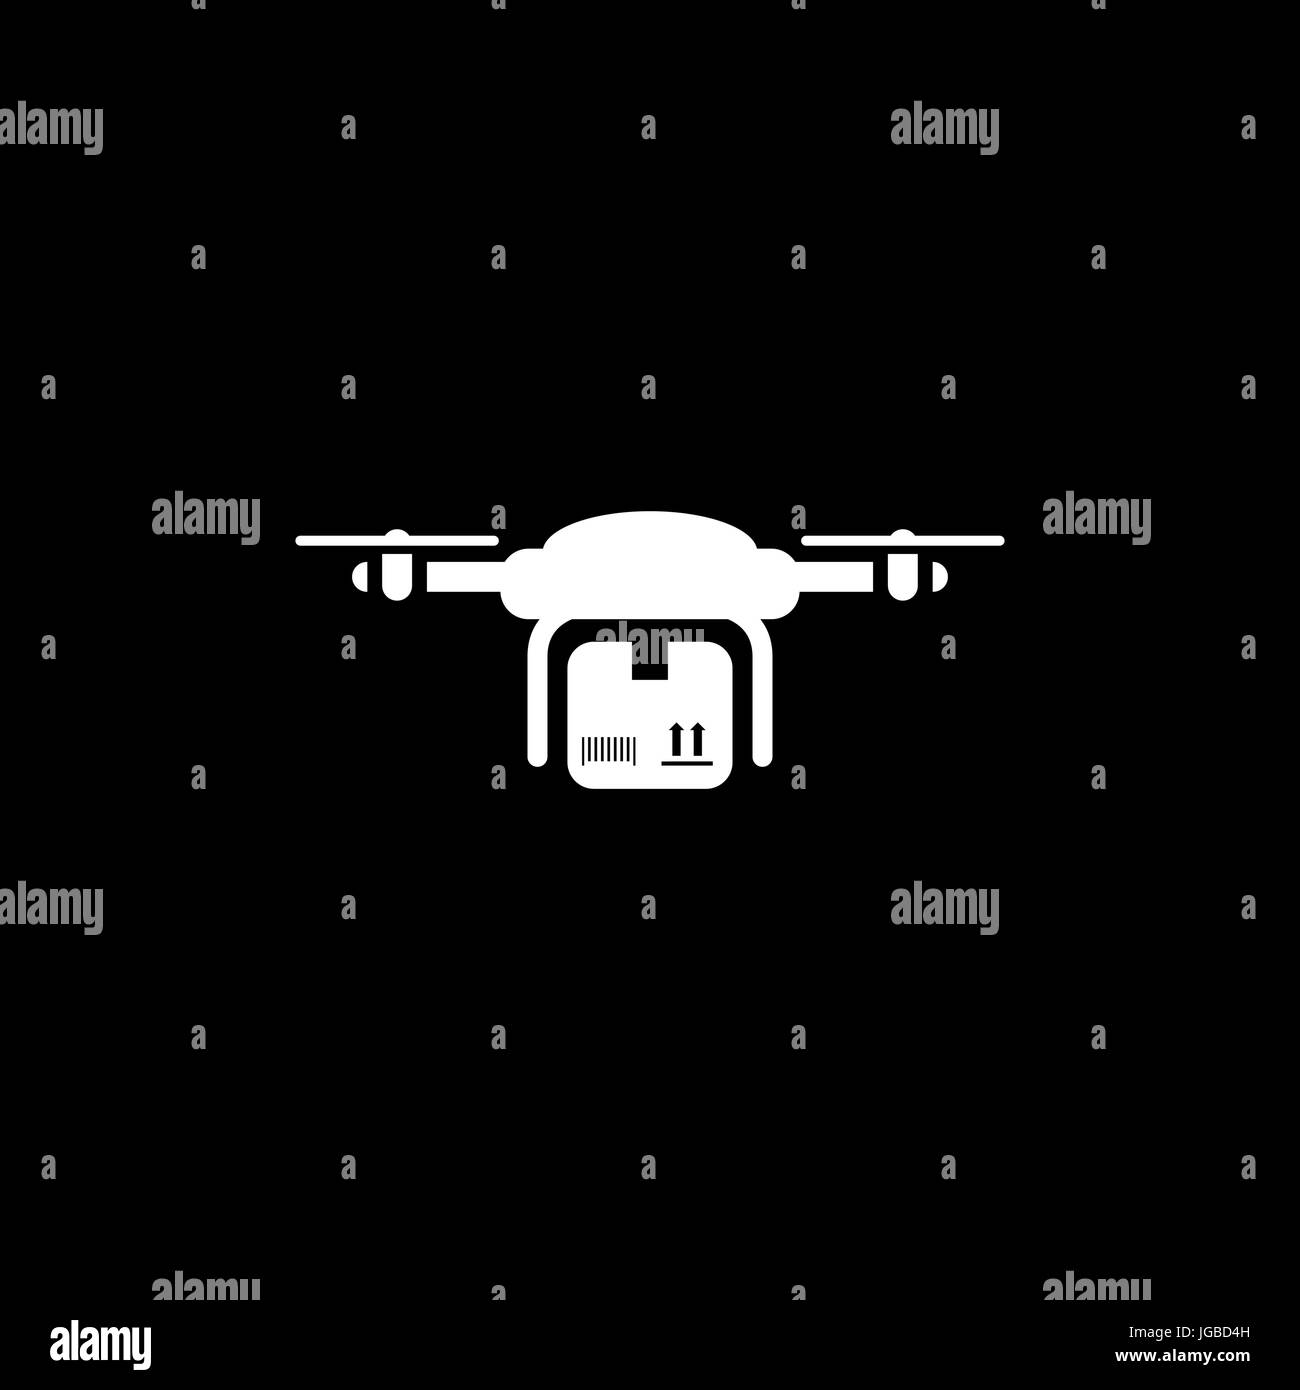 Drone Delivery Icon. Flat Design. Stock Vector